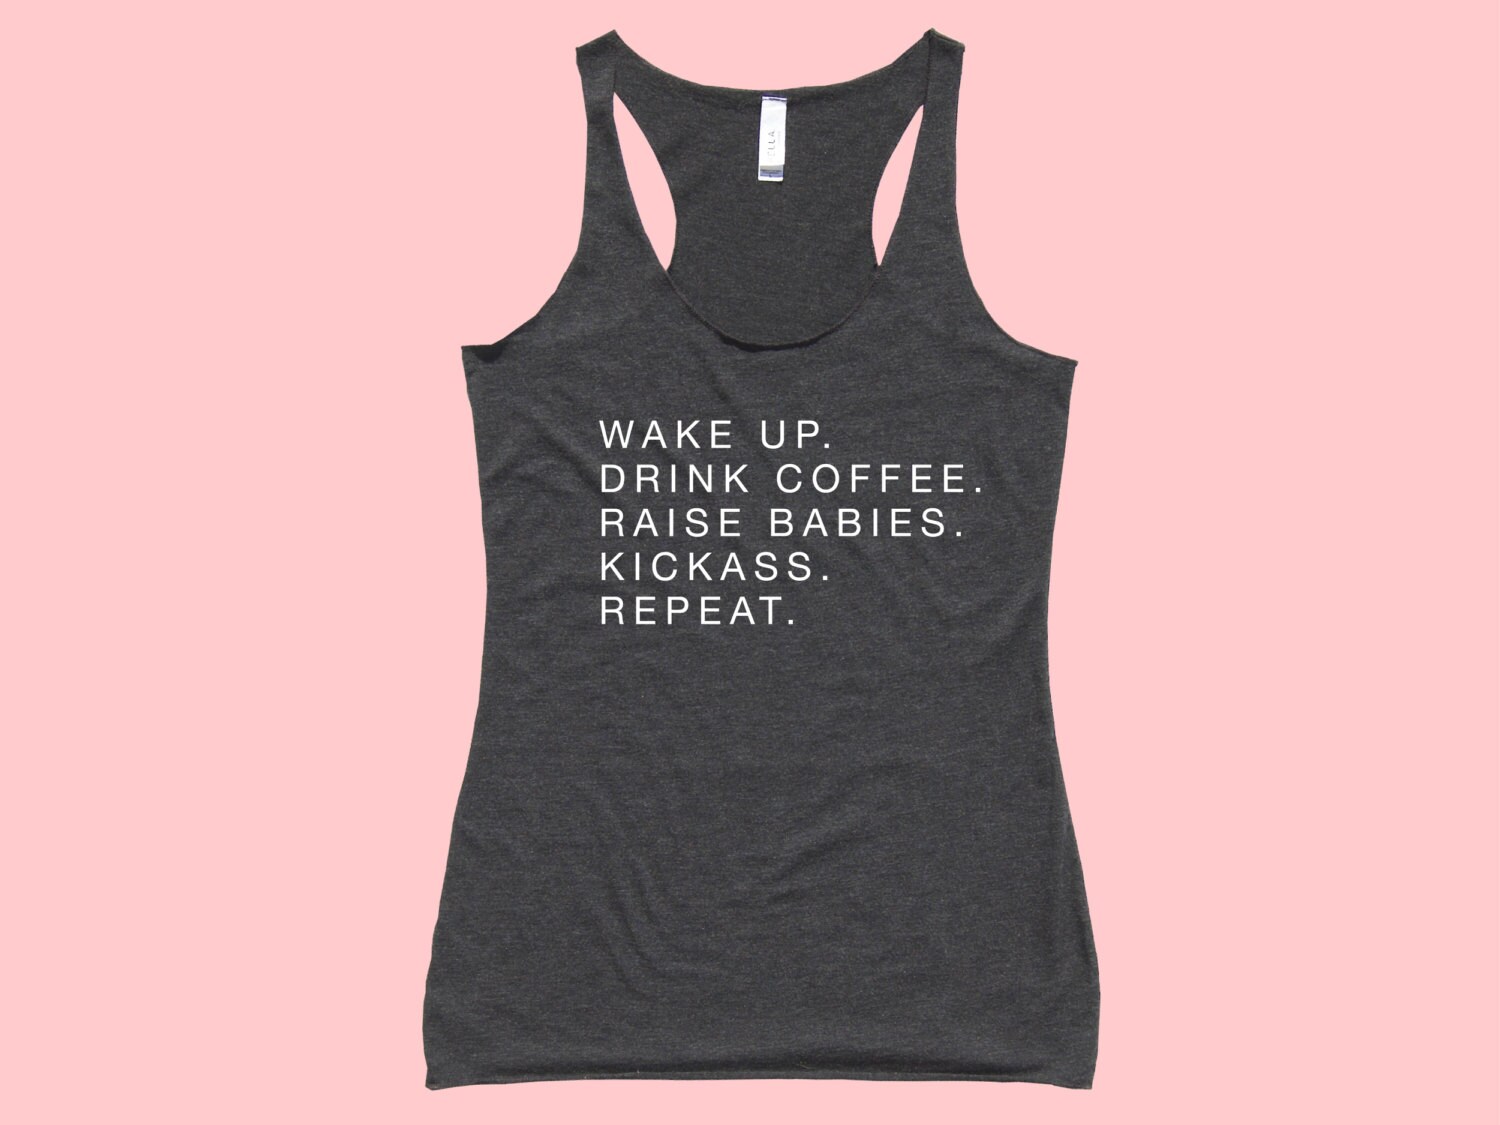 Wake Up. Drink Coffee. Raise Babies. Kickass. Repeat. Fit or | Etsy